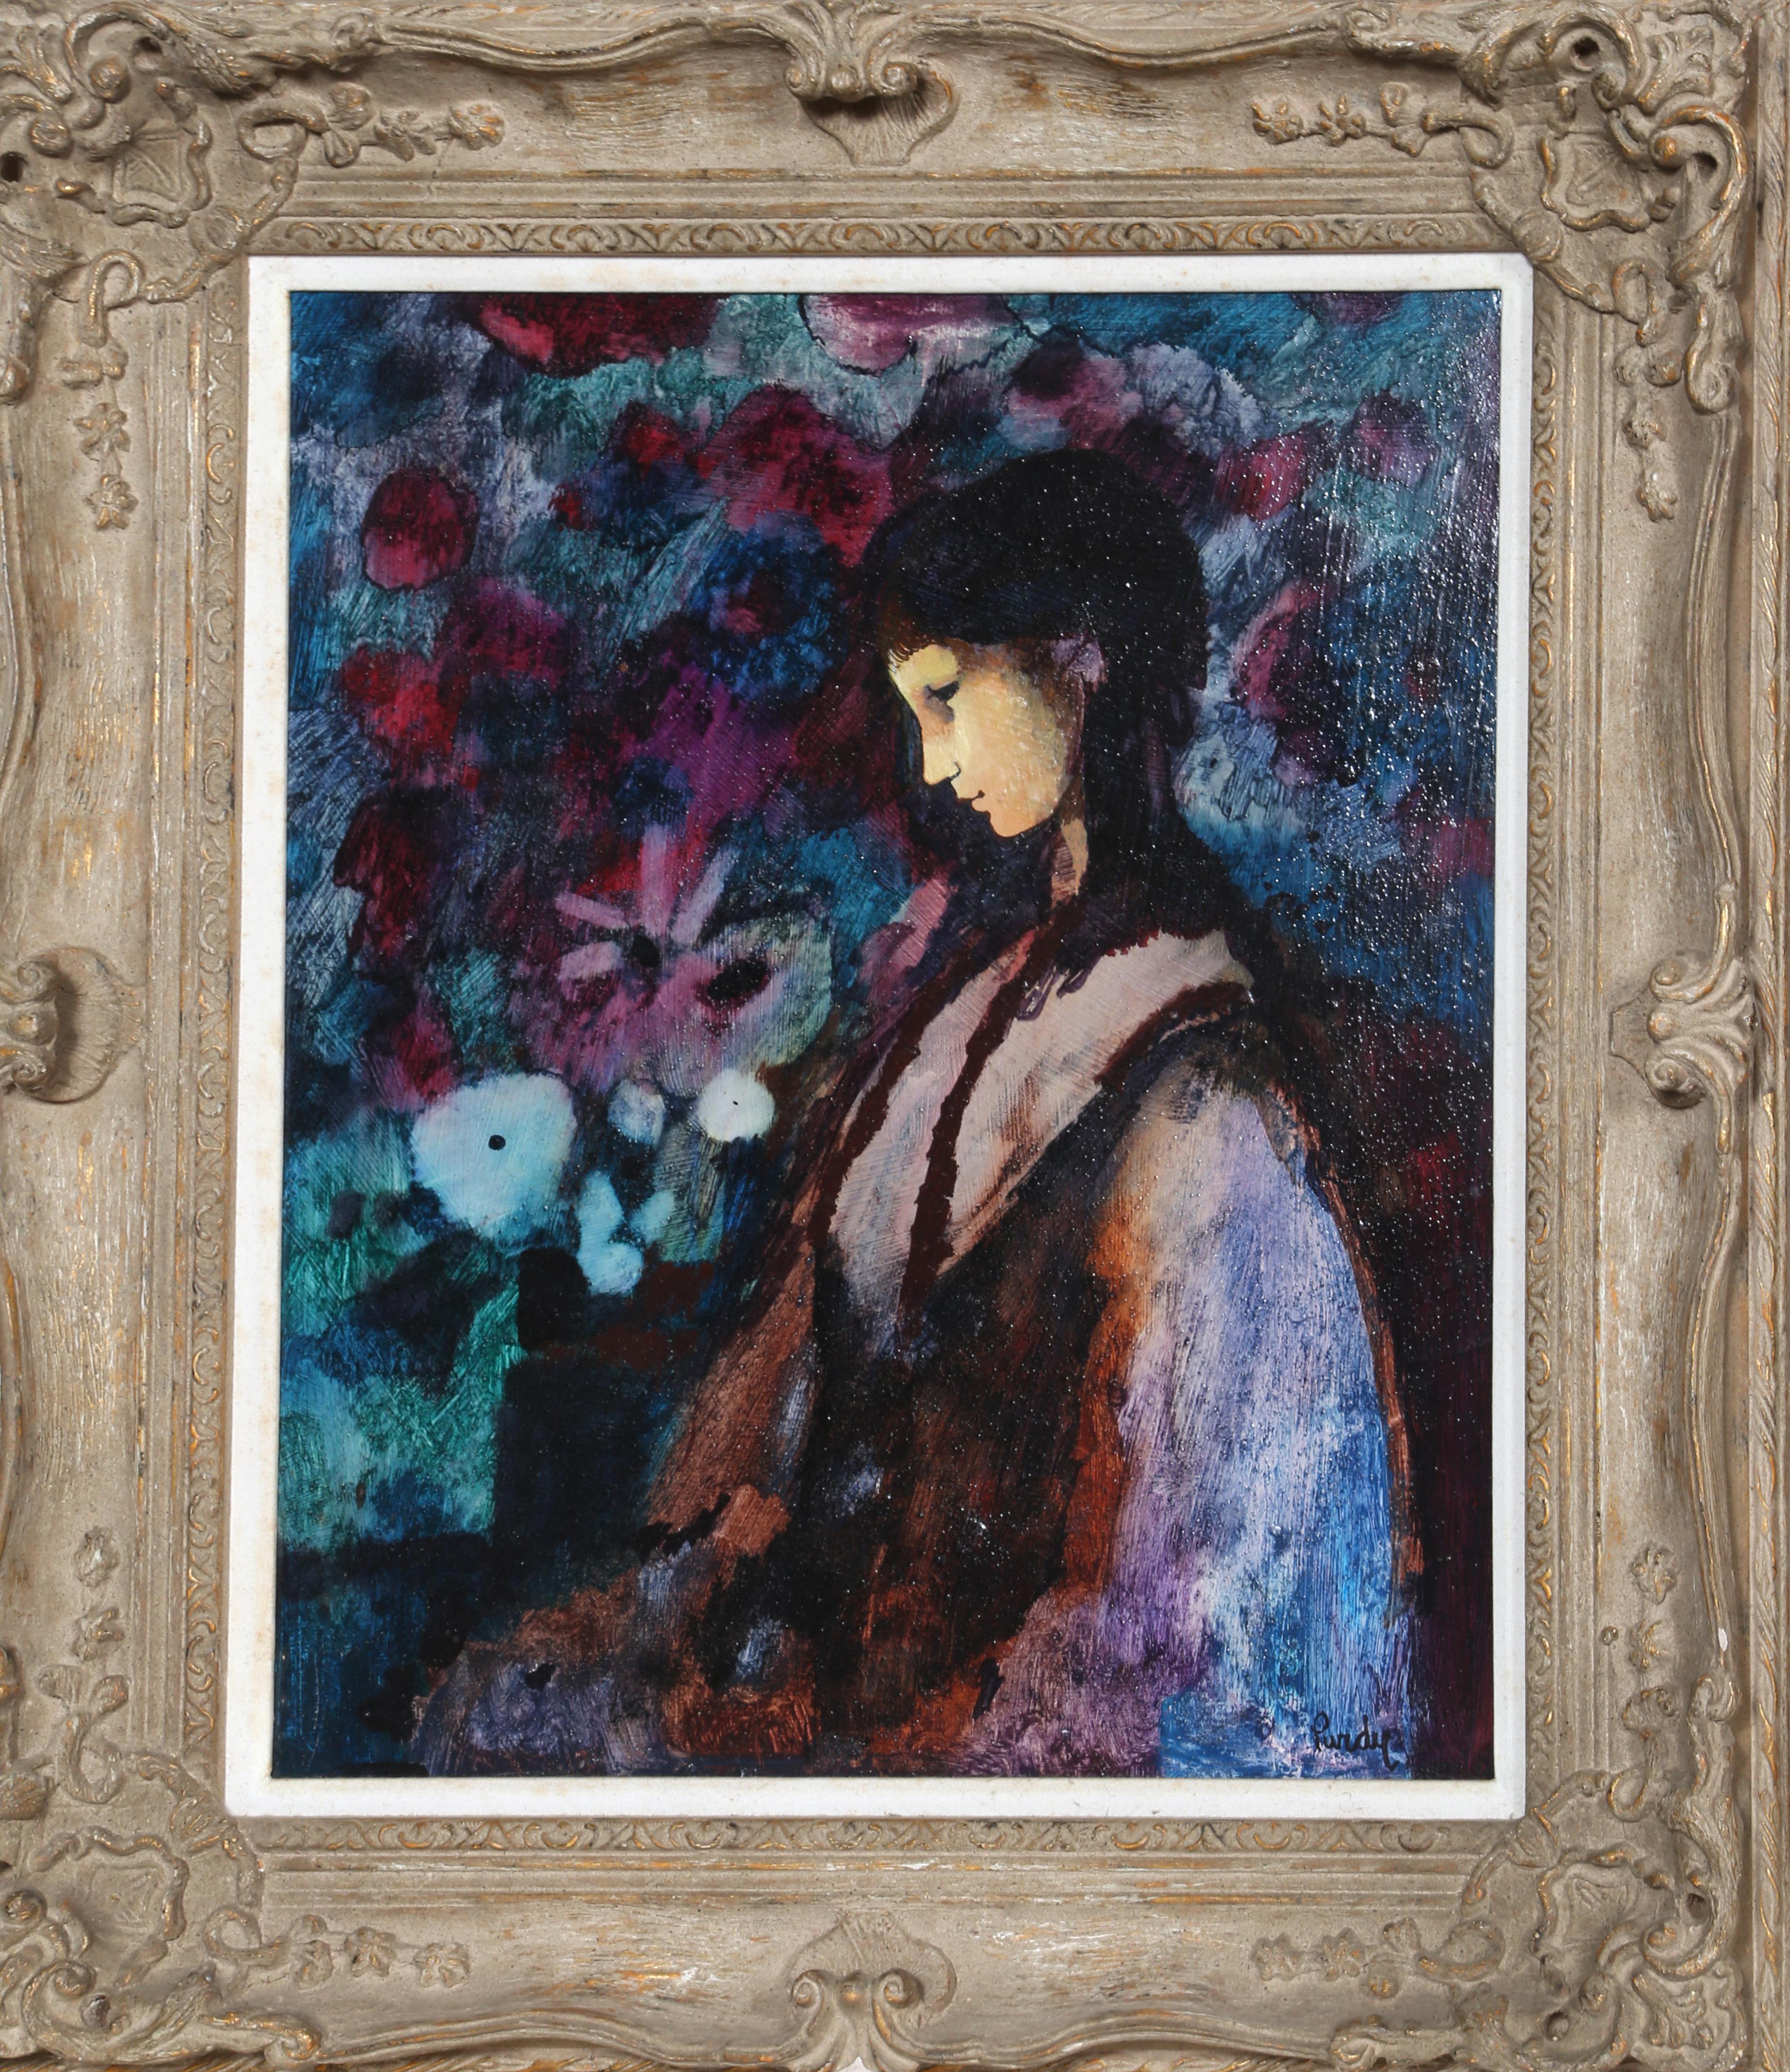 Black Hair, Purple Girl, Oil Painting by Donald Roy Purdy